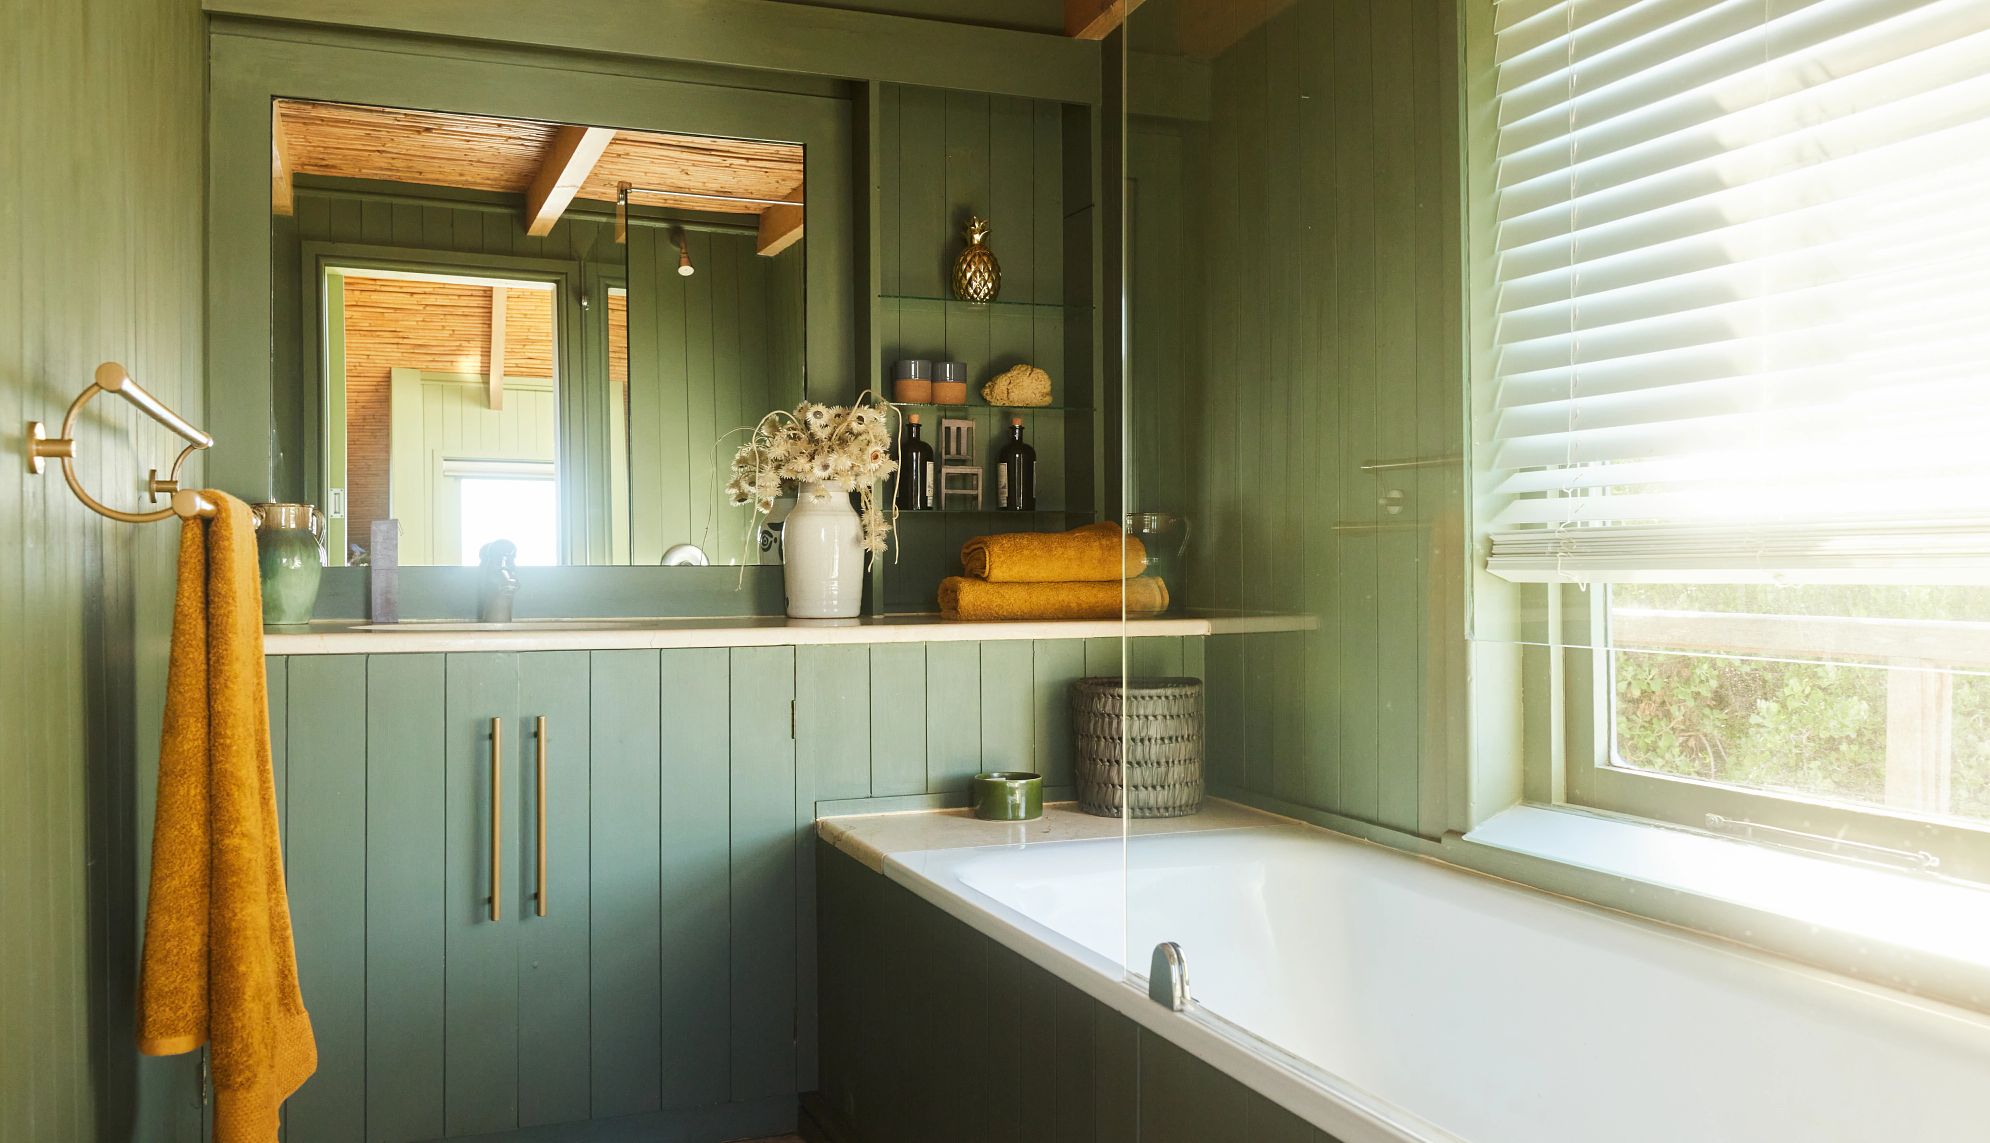 Bathtub and counter in a bathroom with green wood-paneled walls in a holiday home